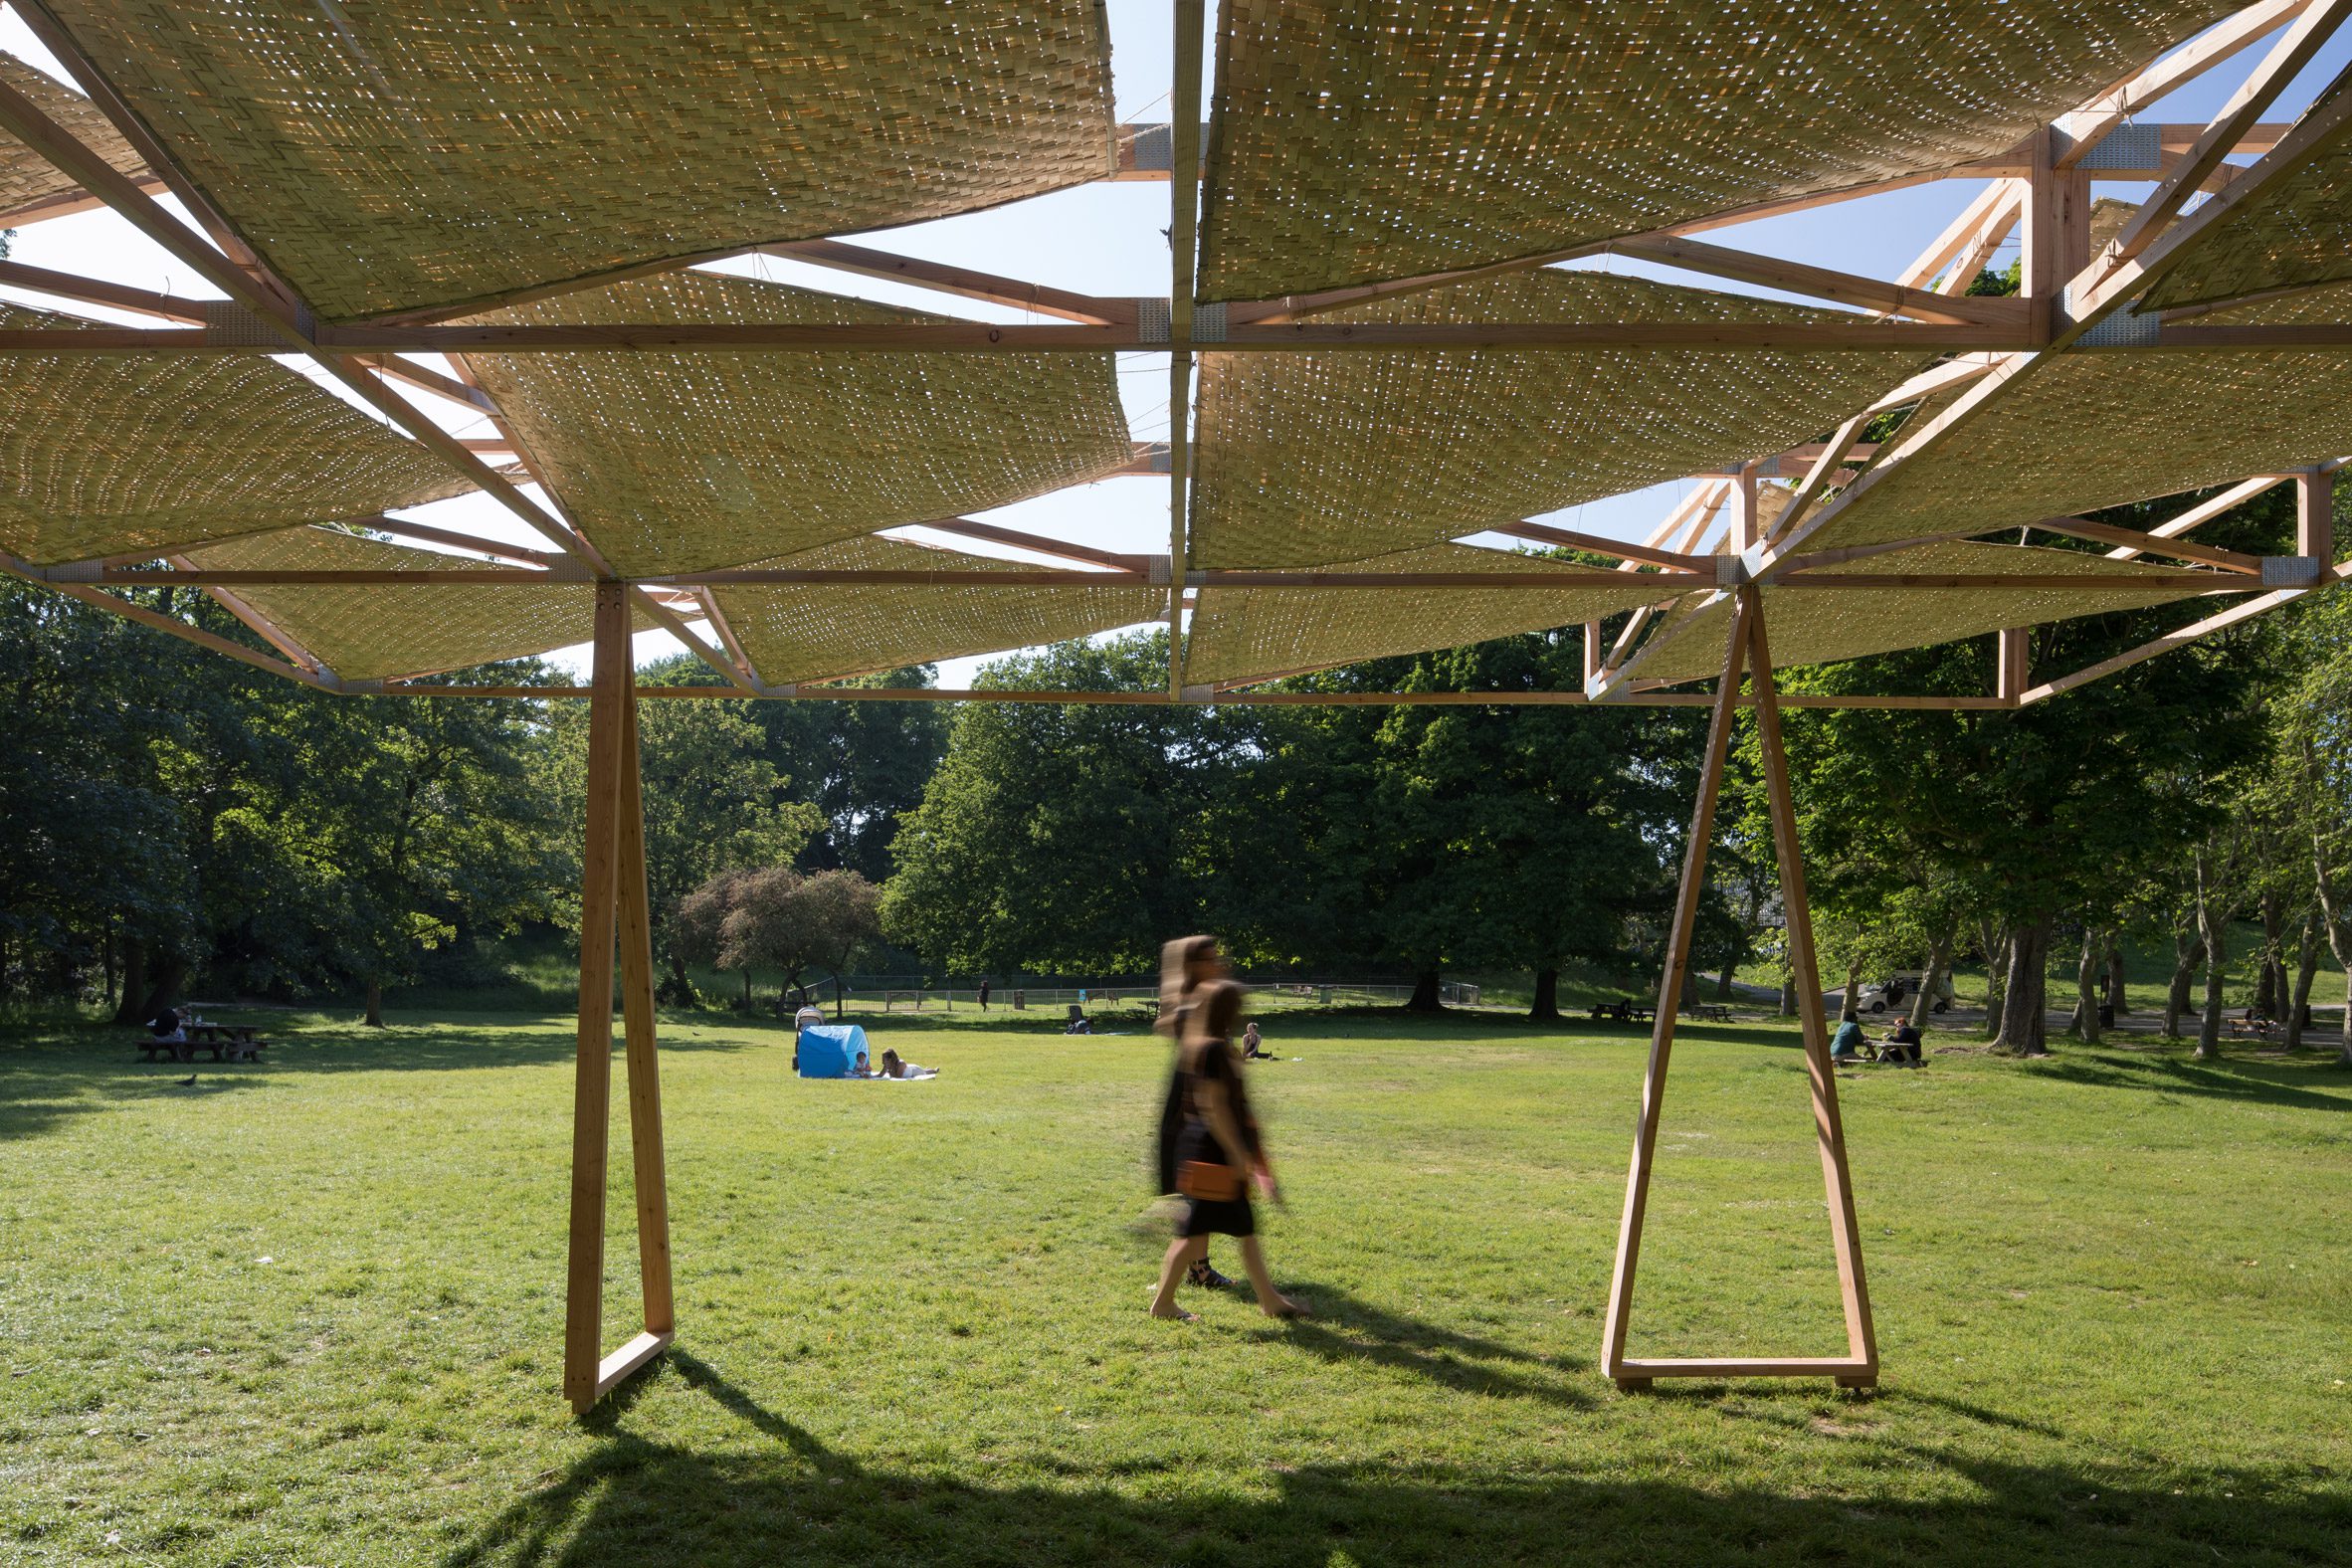 Under the Craft Not Carbon timber and bamboo pavilion by Studio Saar and Webb Yates Engineers